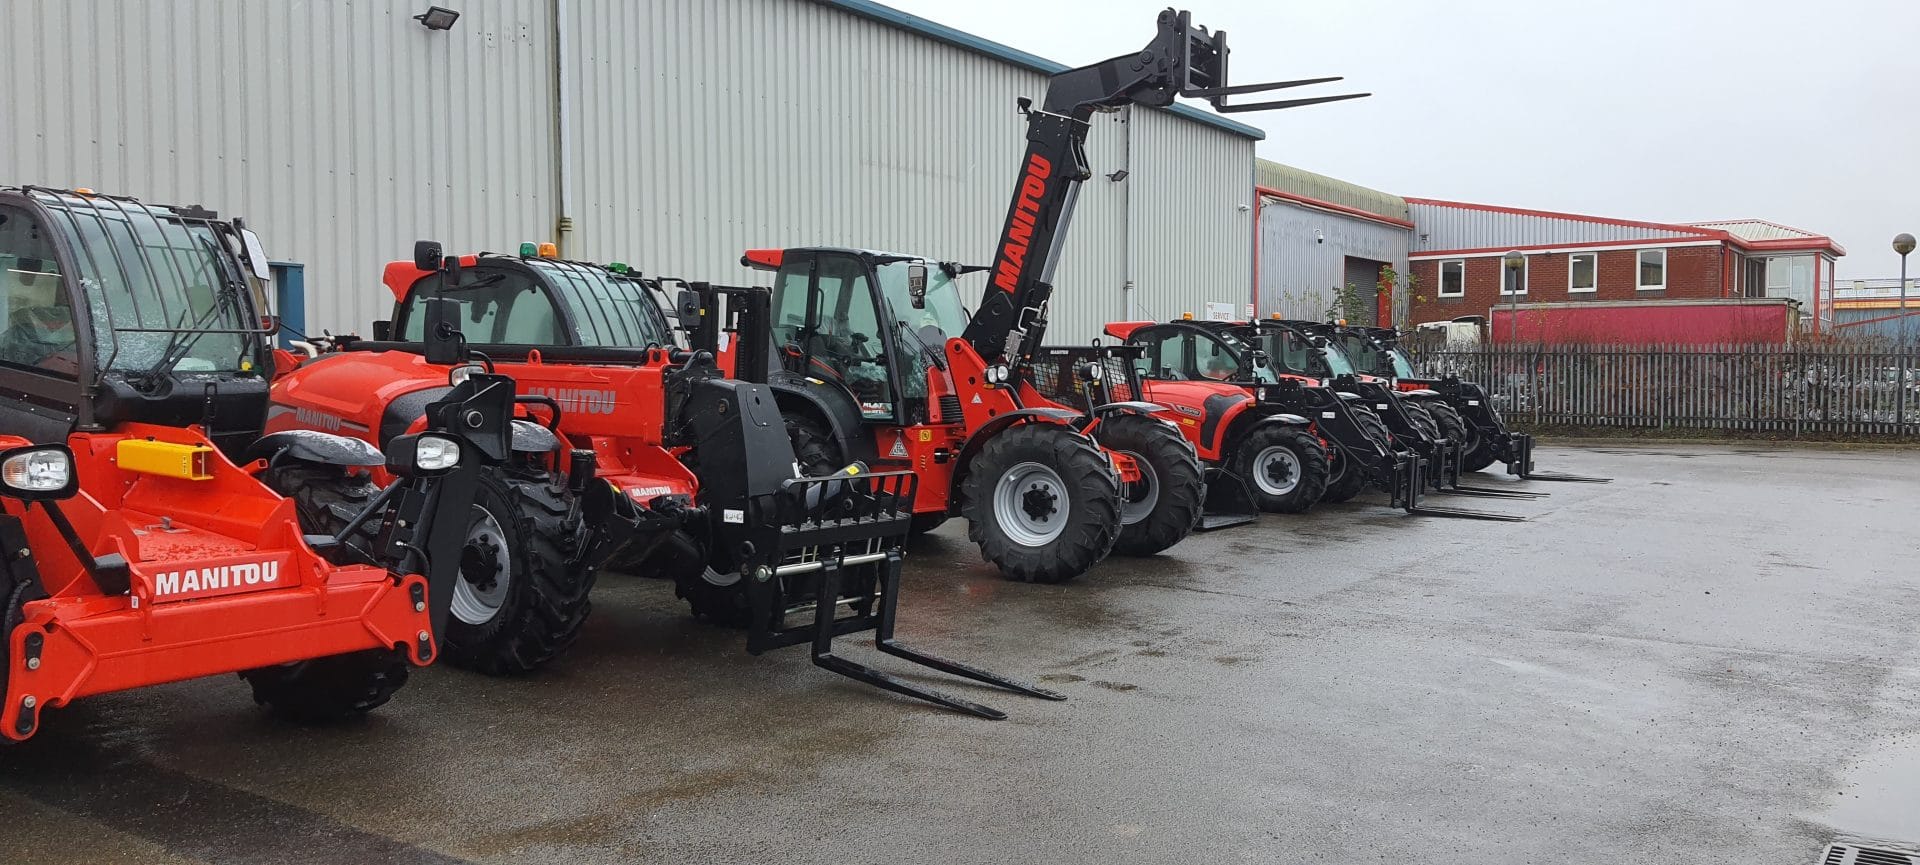 Fleet of Manitou vehicles parked up